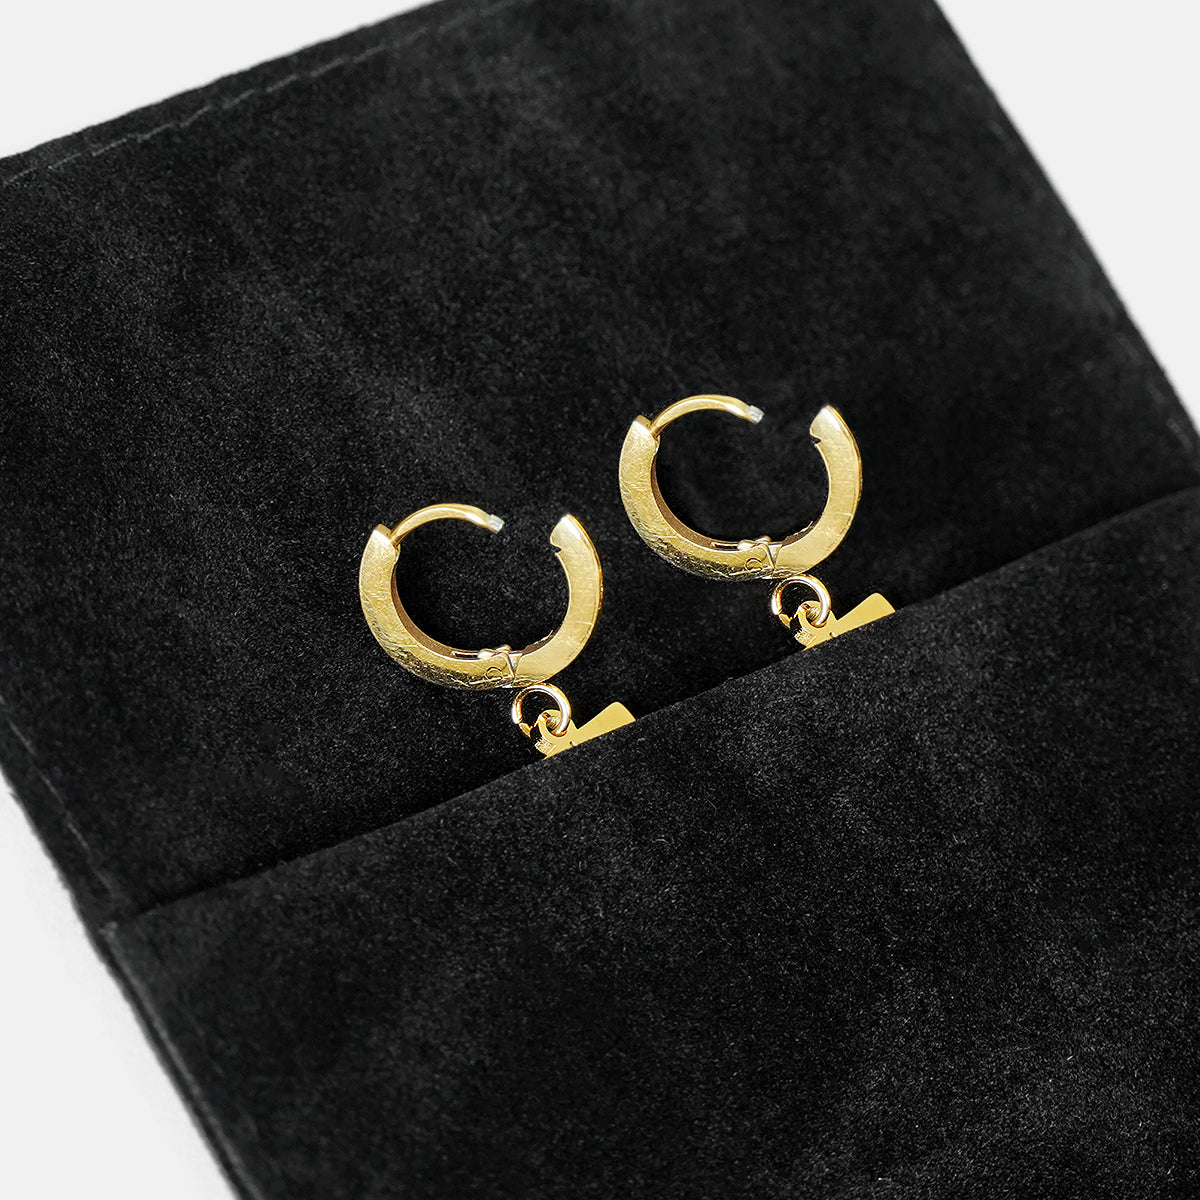 74 Number Earring - Gold Plated Stainless Steel